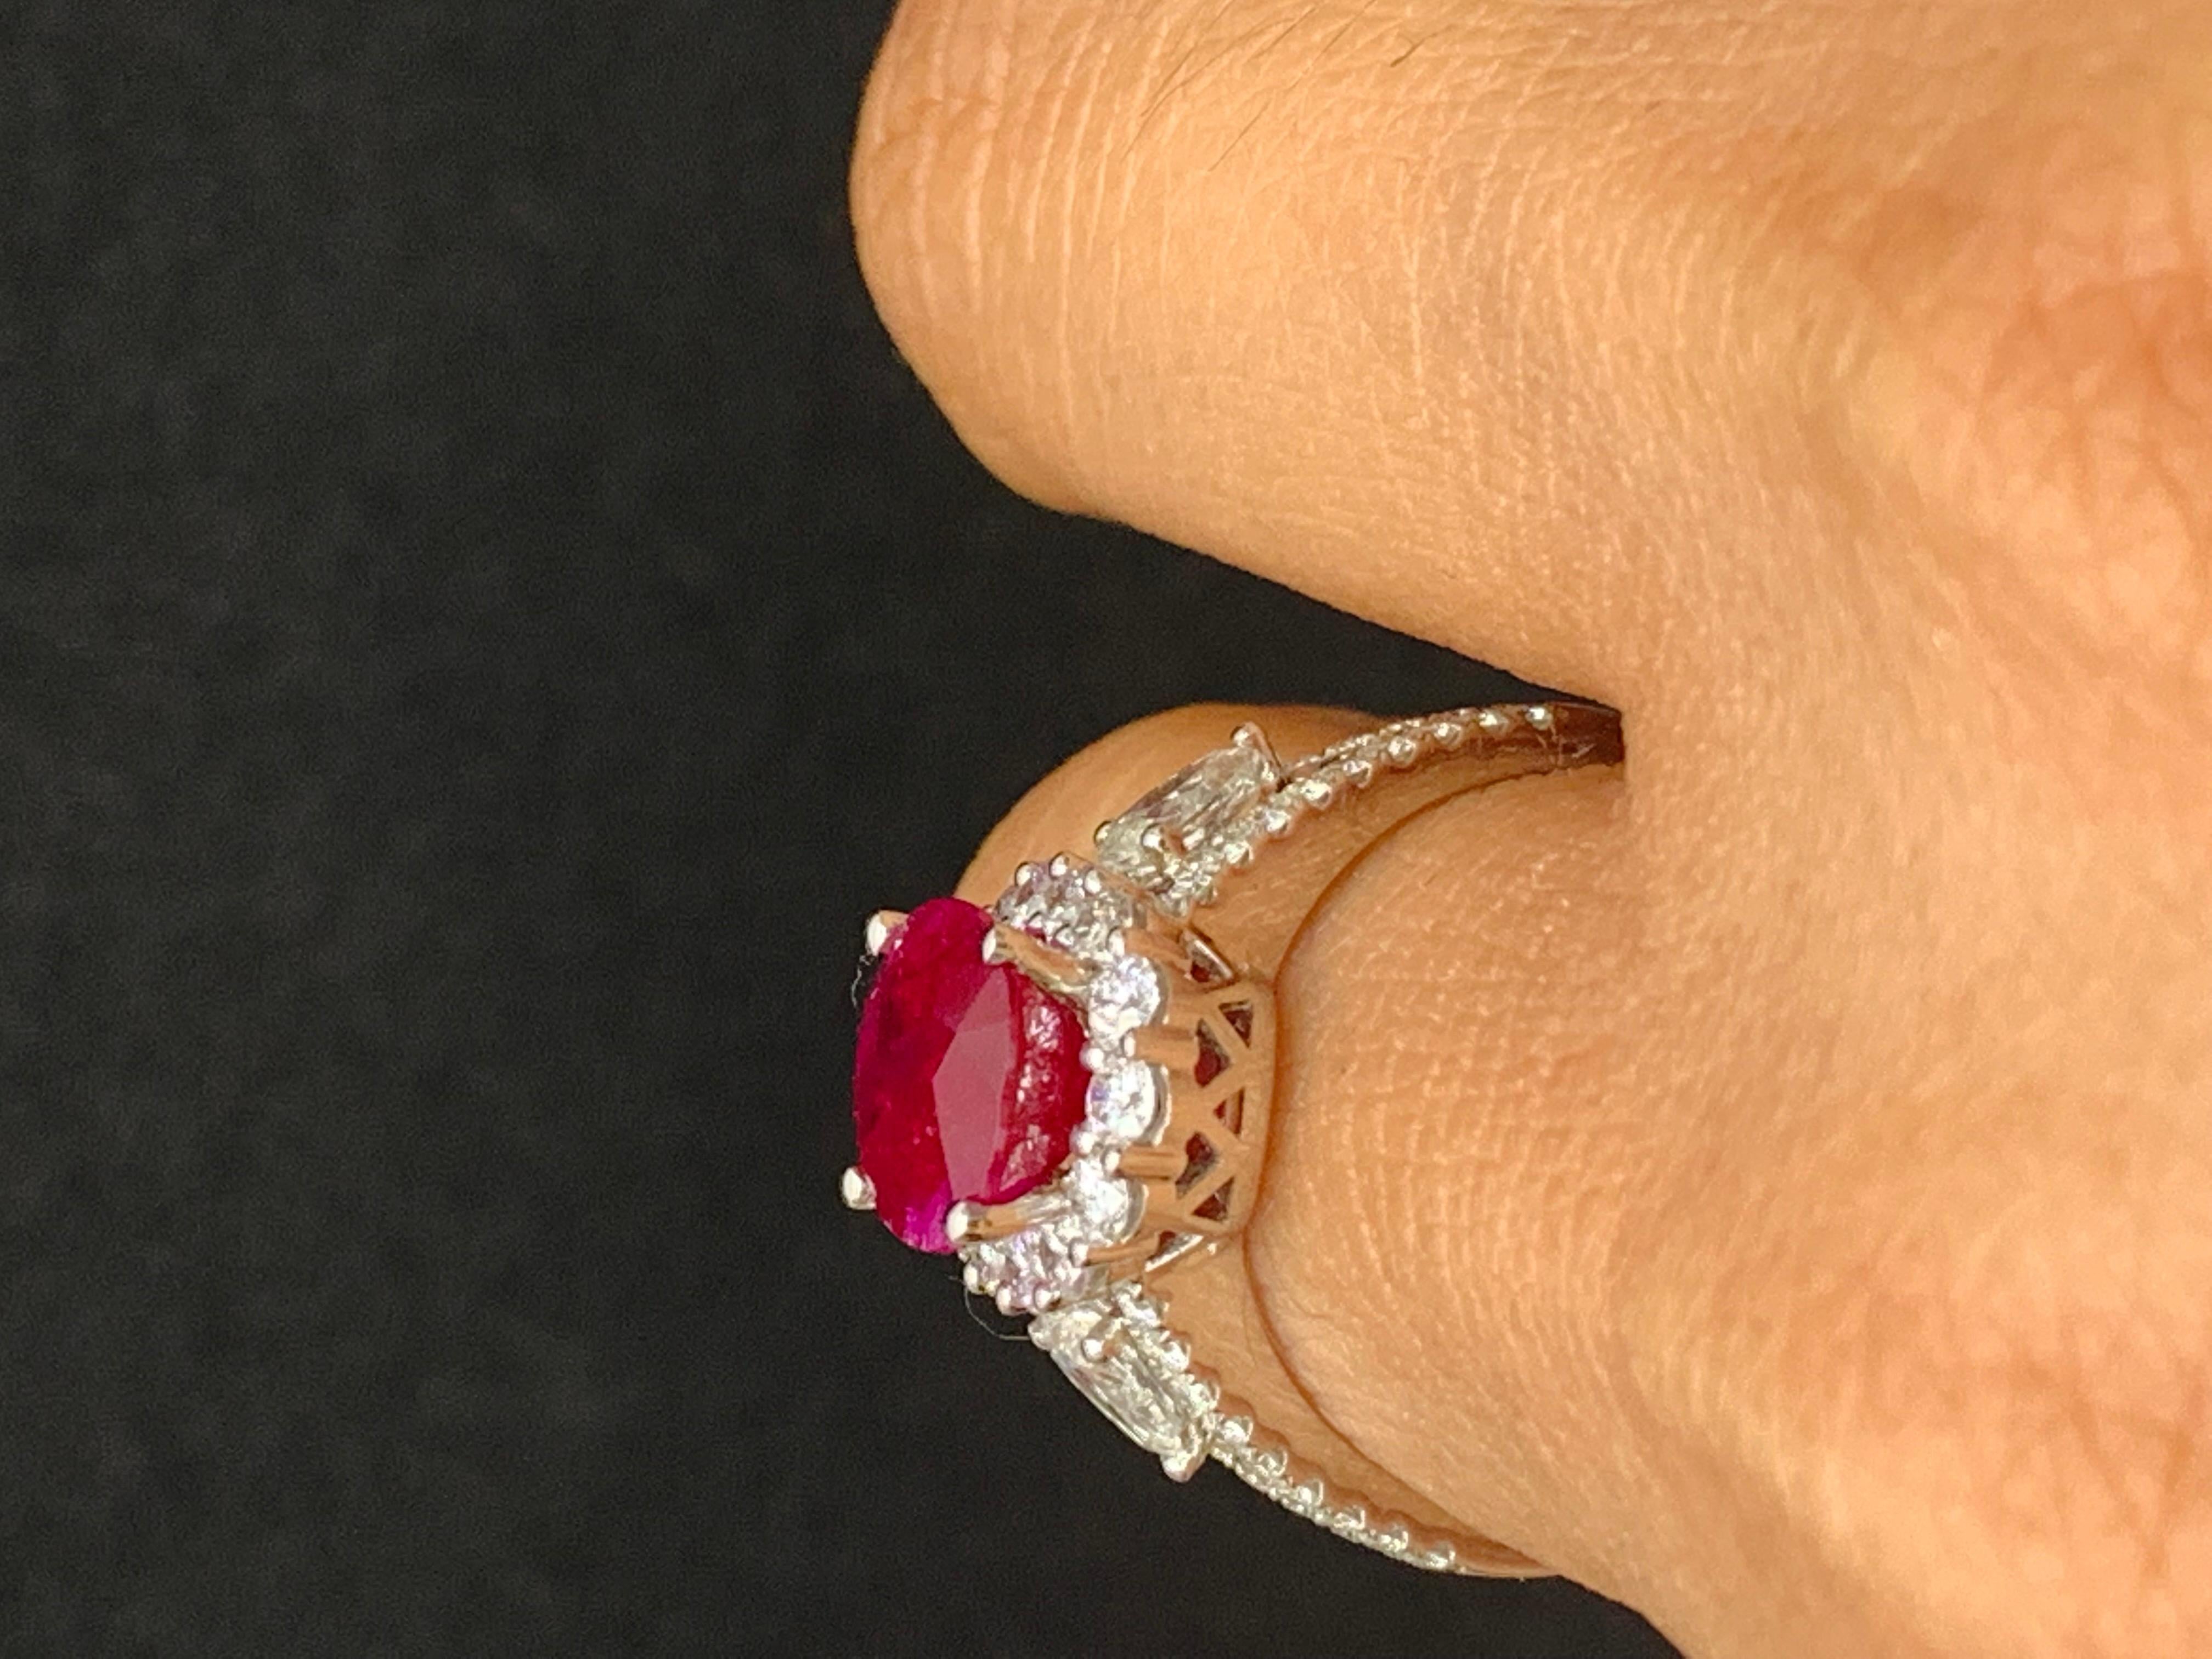 3.58 Carat Oval Cut Ruby and Diamond Halo Ring in 18K White Gold For Sale 8